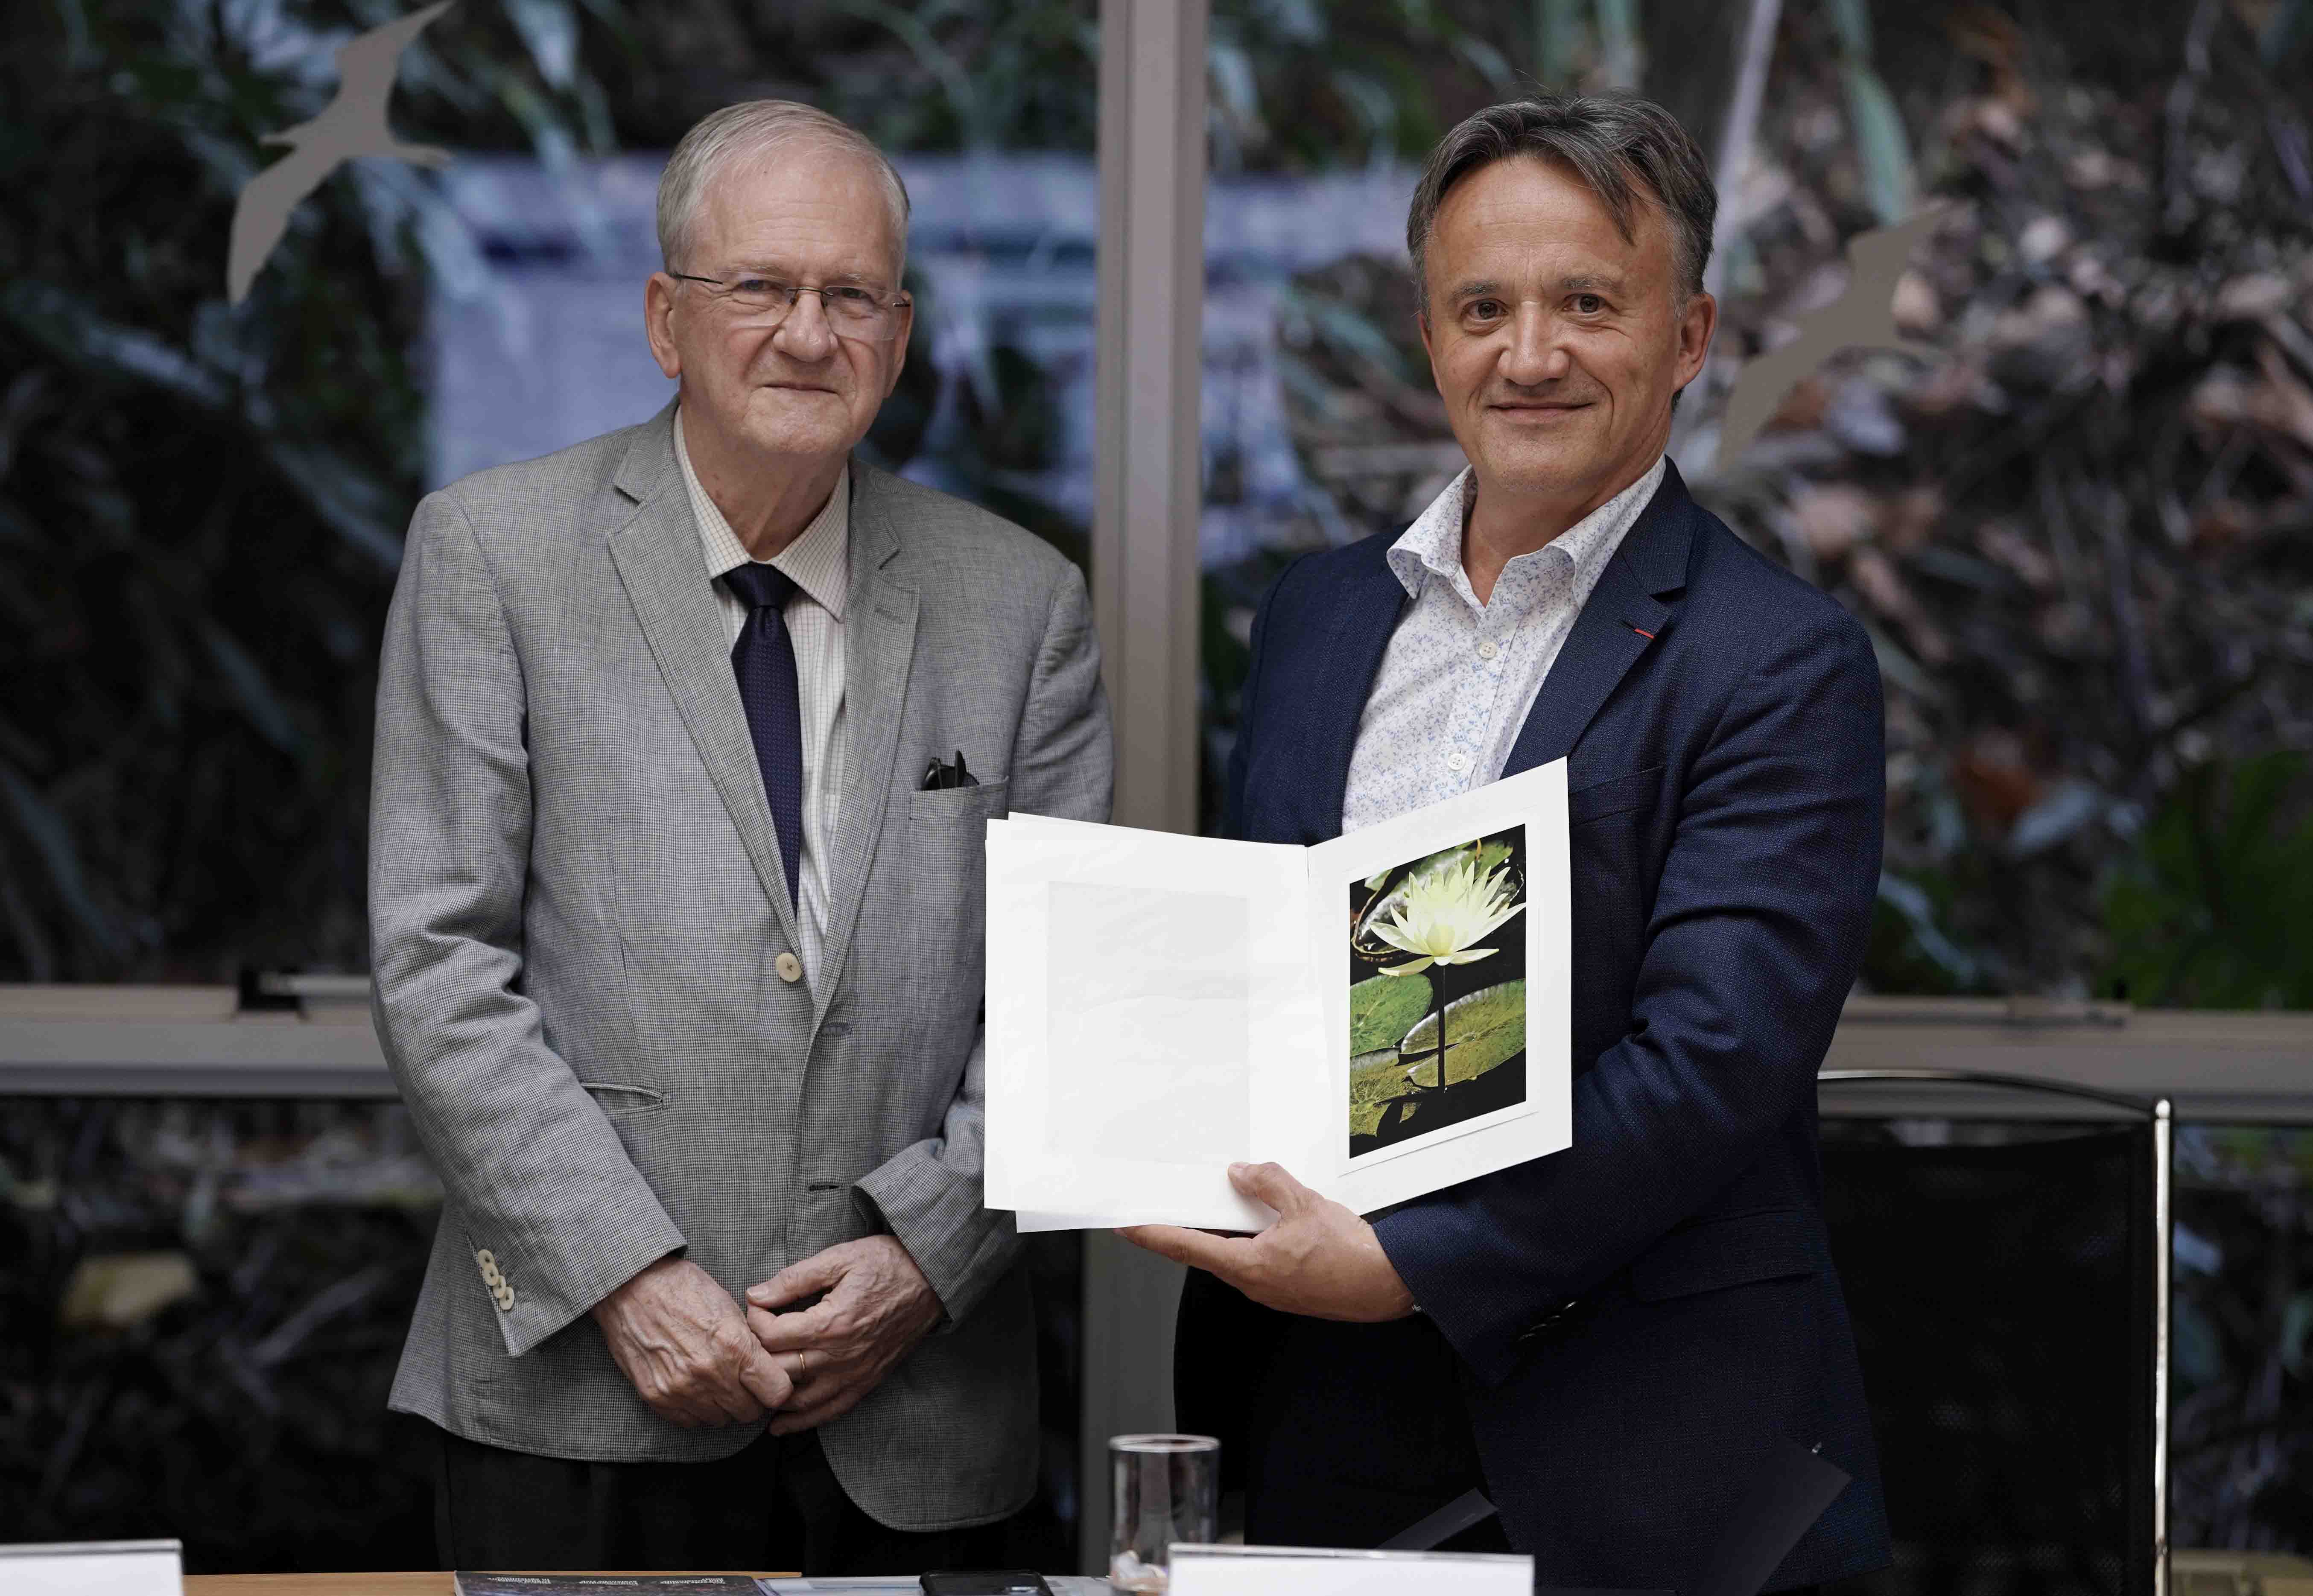 FAPESP and France’s National Institute of Research on Agriculture and Environment plan cooperation agreement